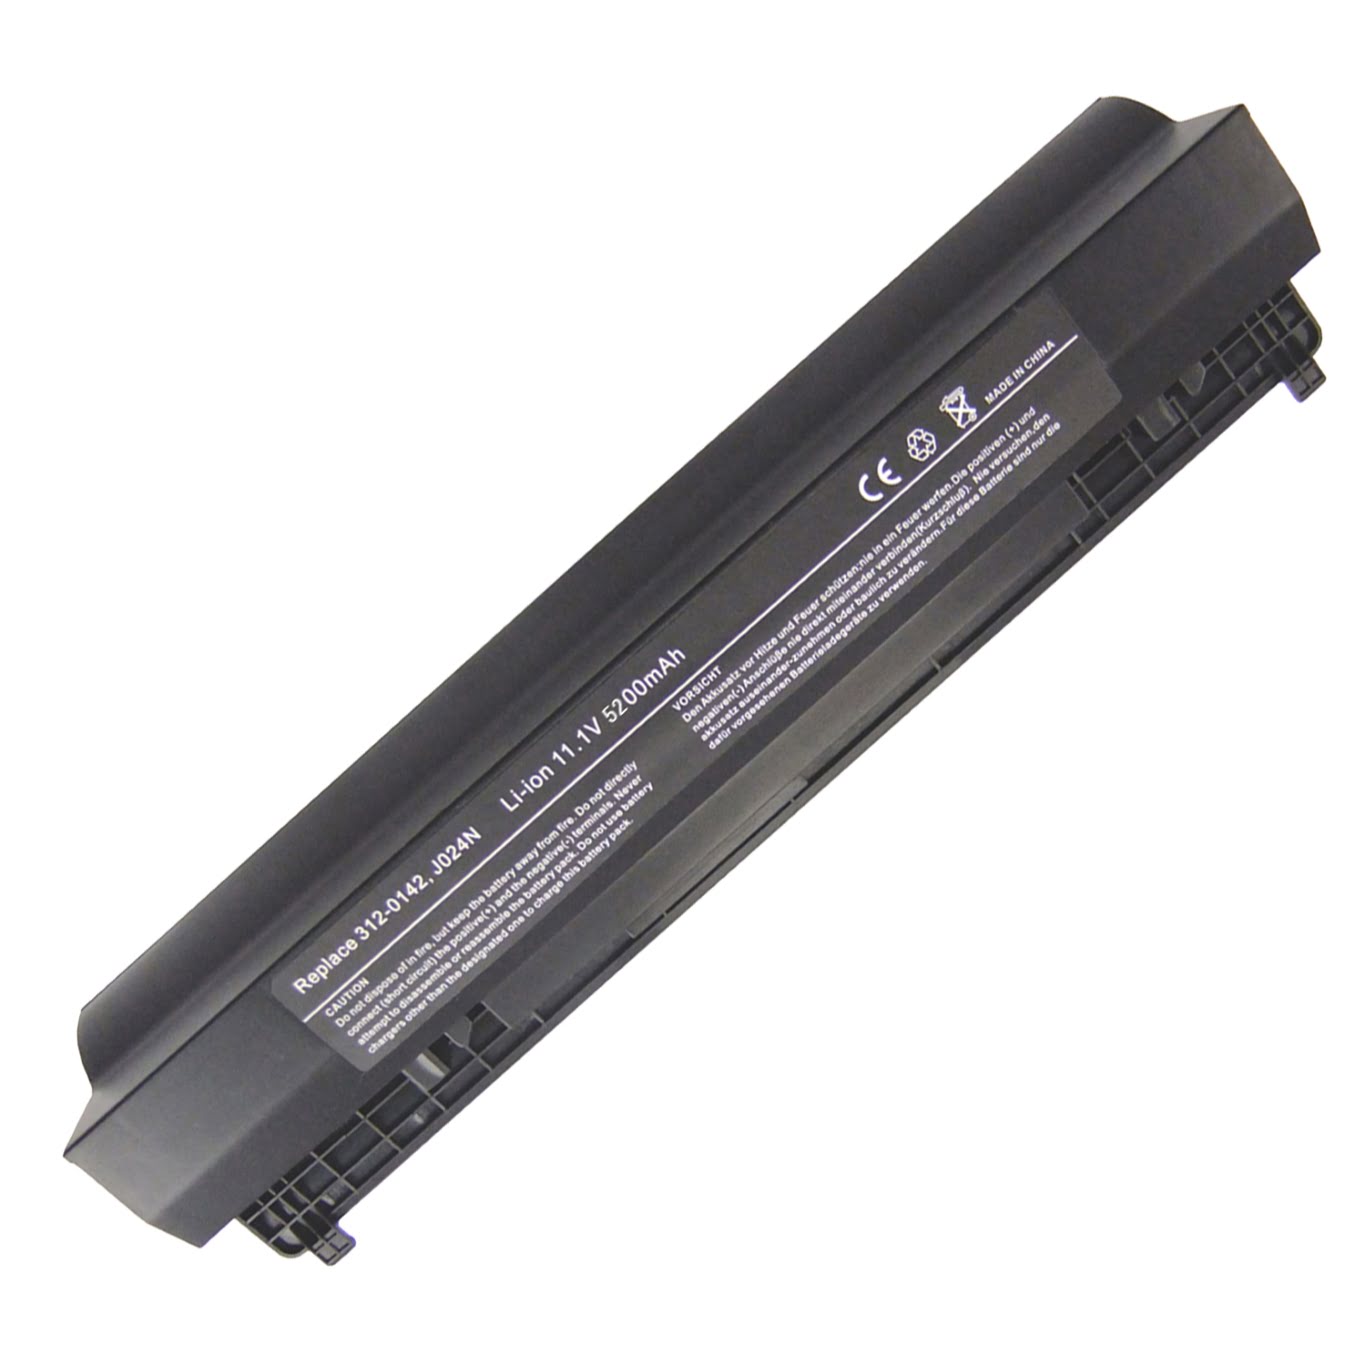 00R271, 01P255 replacement Laptop Battery for Dell Latitude 2100, Latitude 2110, 6 cells, 11.1V, 4400mAh